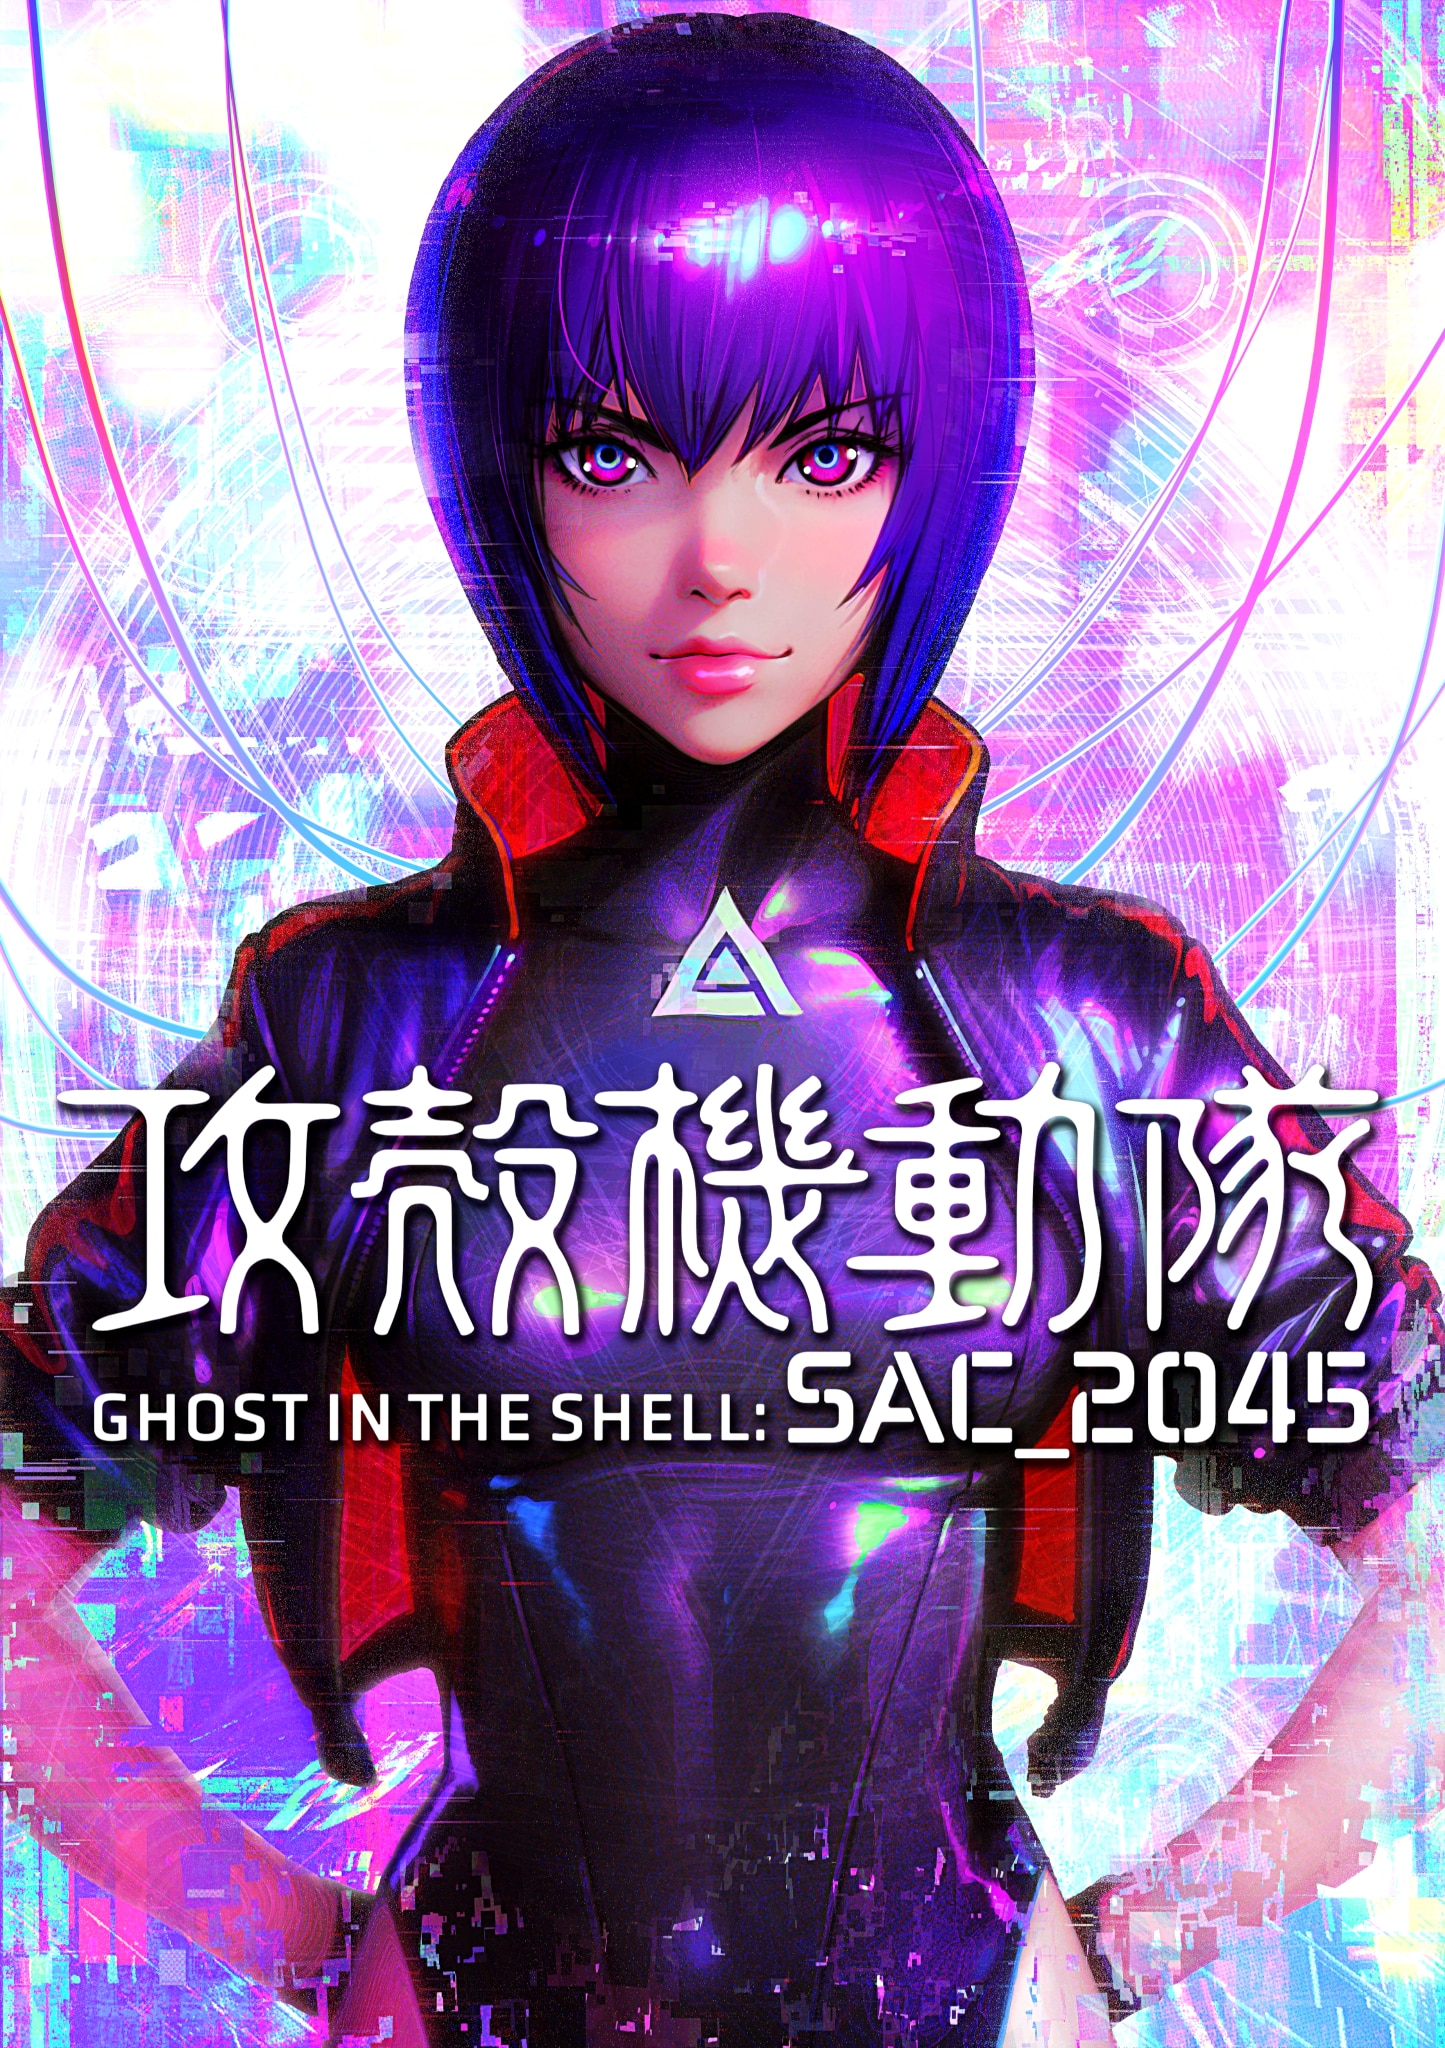 Annonce du film Ghost in the Shell : Sac_2045